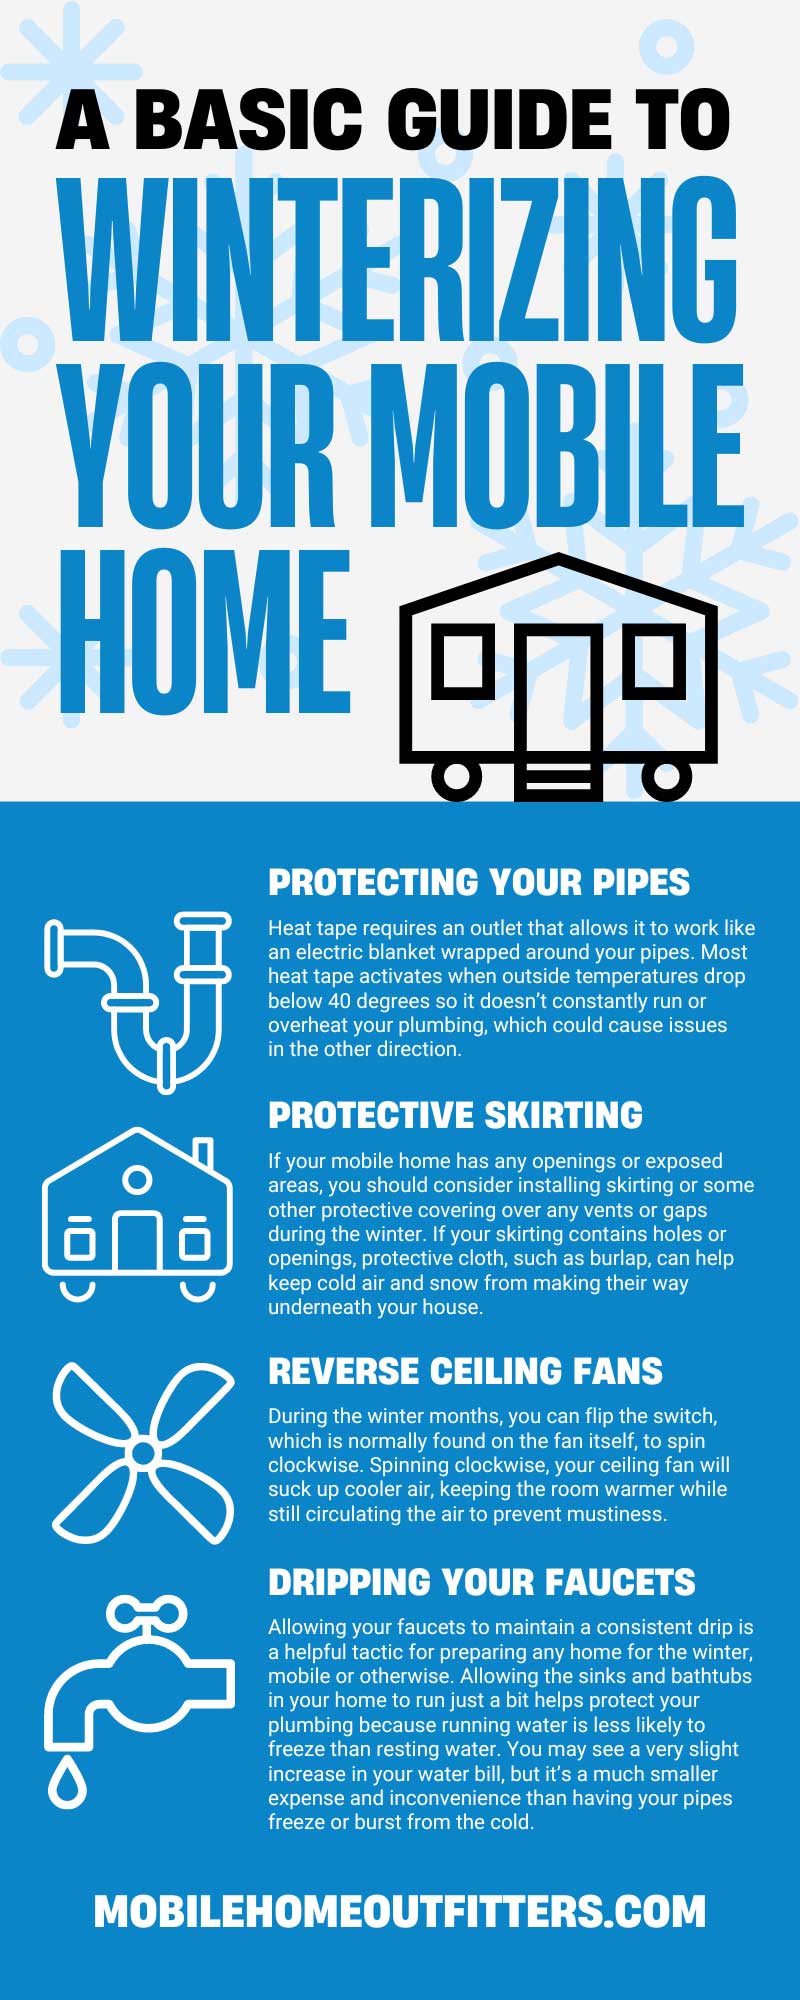 A Basic Guide to Winterizing Your Mobile Home